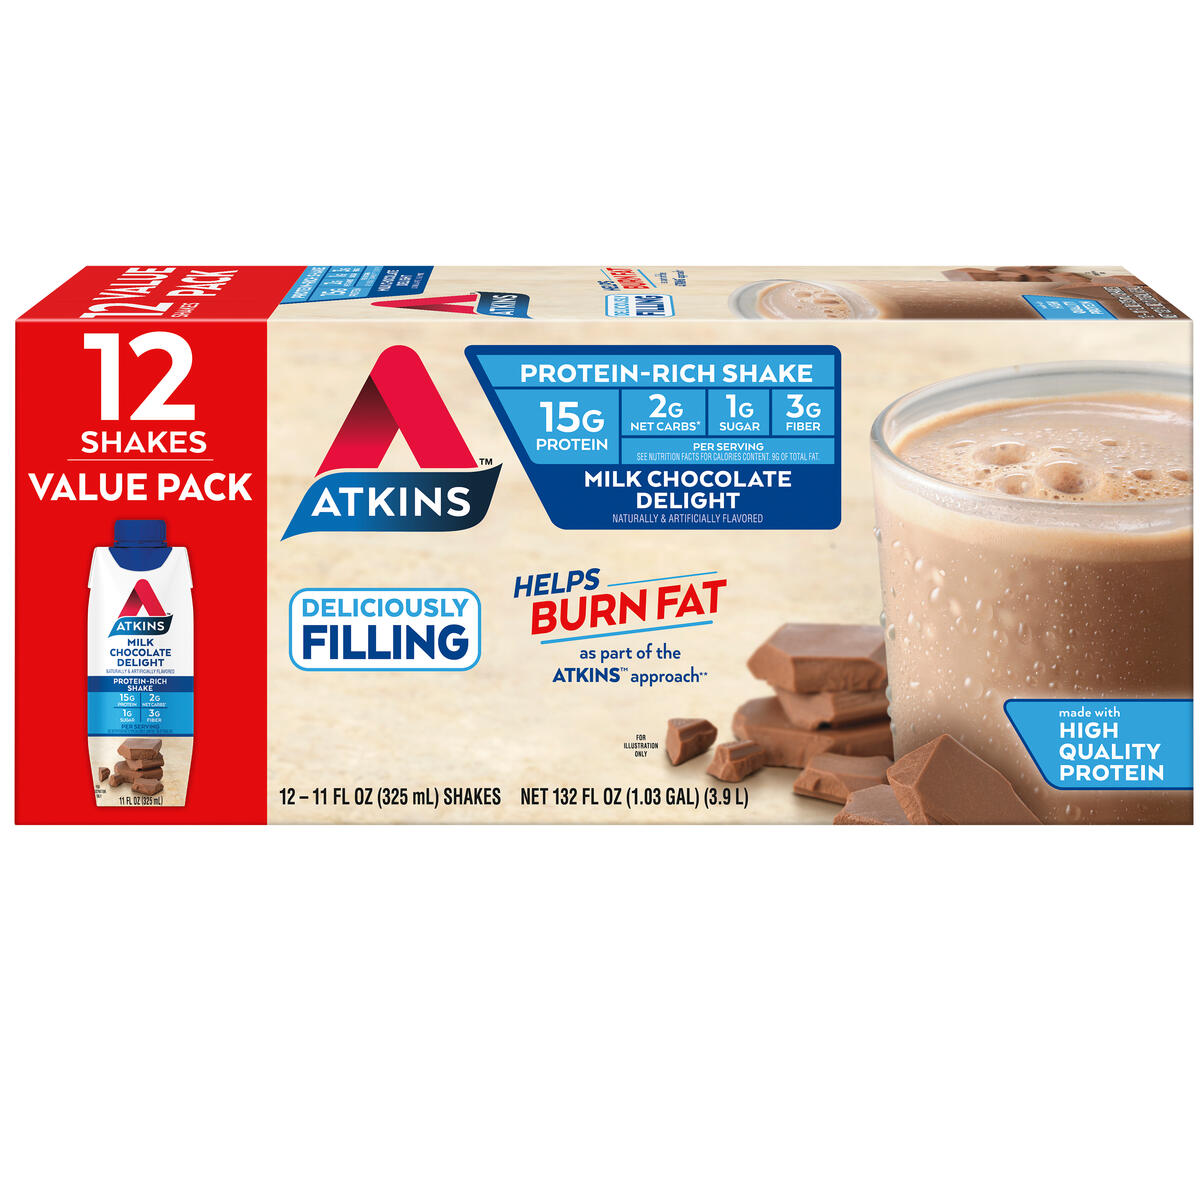 Atkins Milk Chocolate Delight Protein Shake, High Protein, Low Carb, Low Sugar, Keto Friendly, Gluten Free, 12 Ct - image 1 of 8